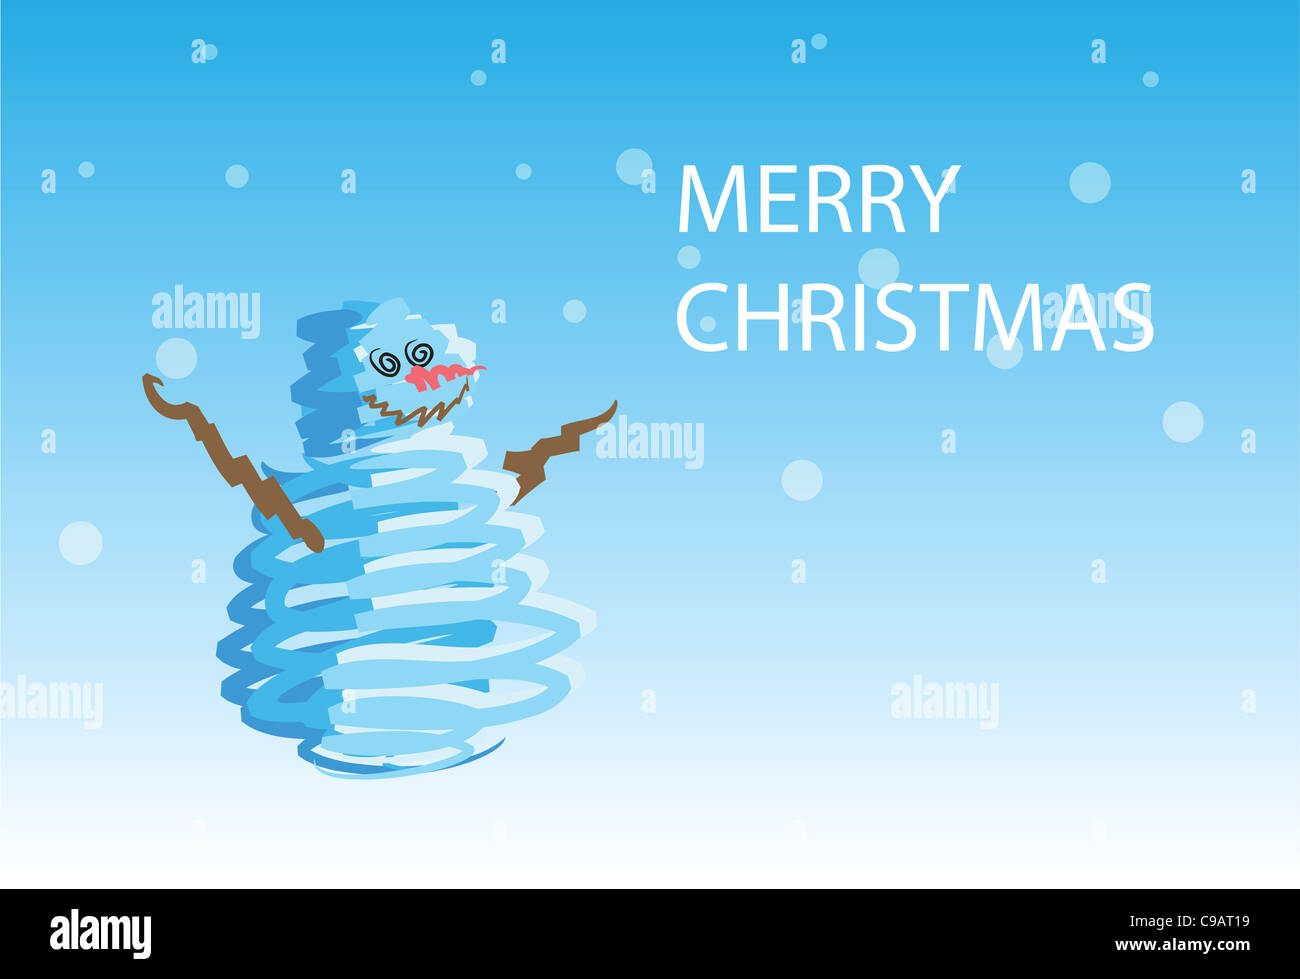 snowman on snowing background, Christmas greetings. 1 of the 6 same styled Christmas cards. Stock Photo